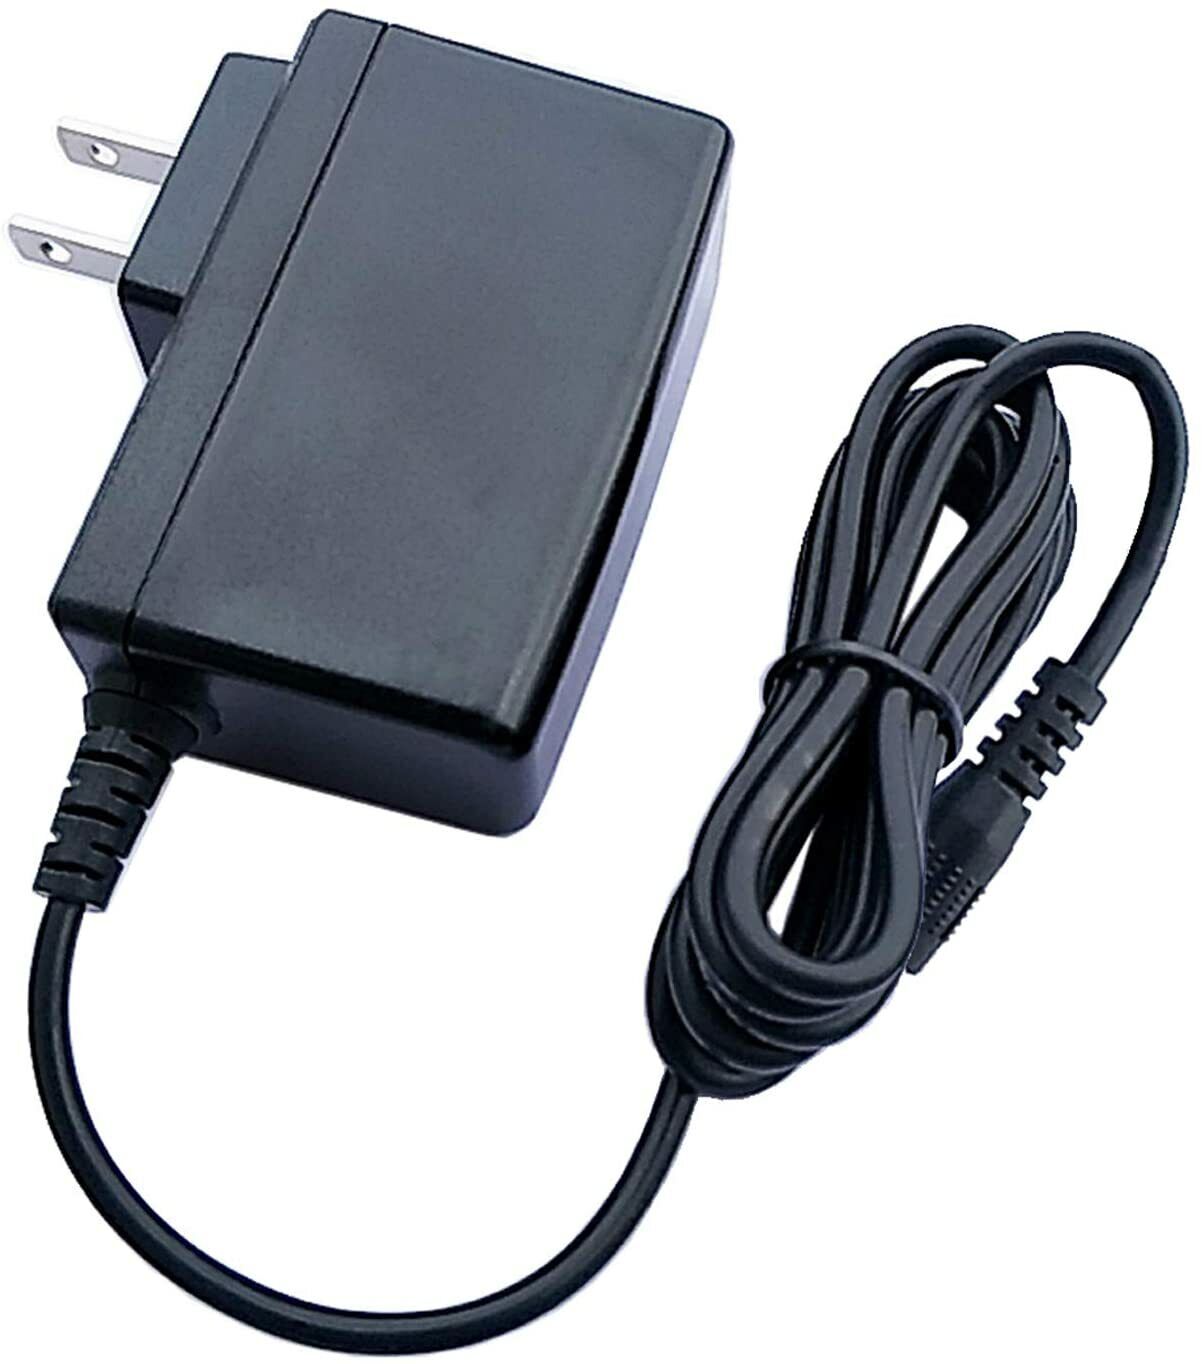 WALL charger  AC Adapter For Dahua NVR4108-P-4KS2 480072G Video Recorder